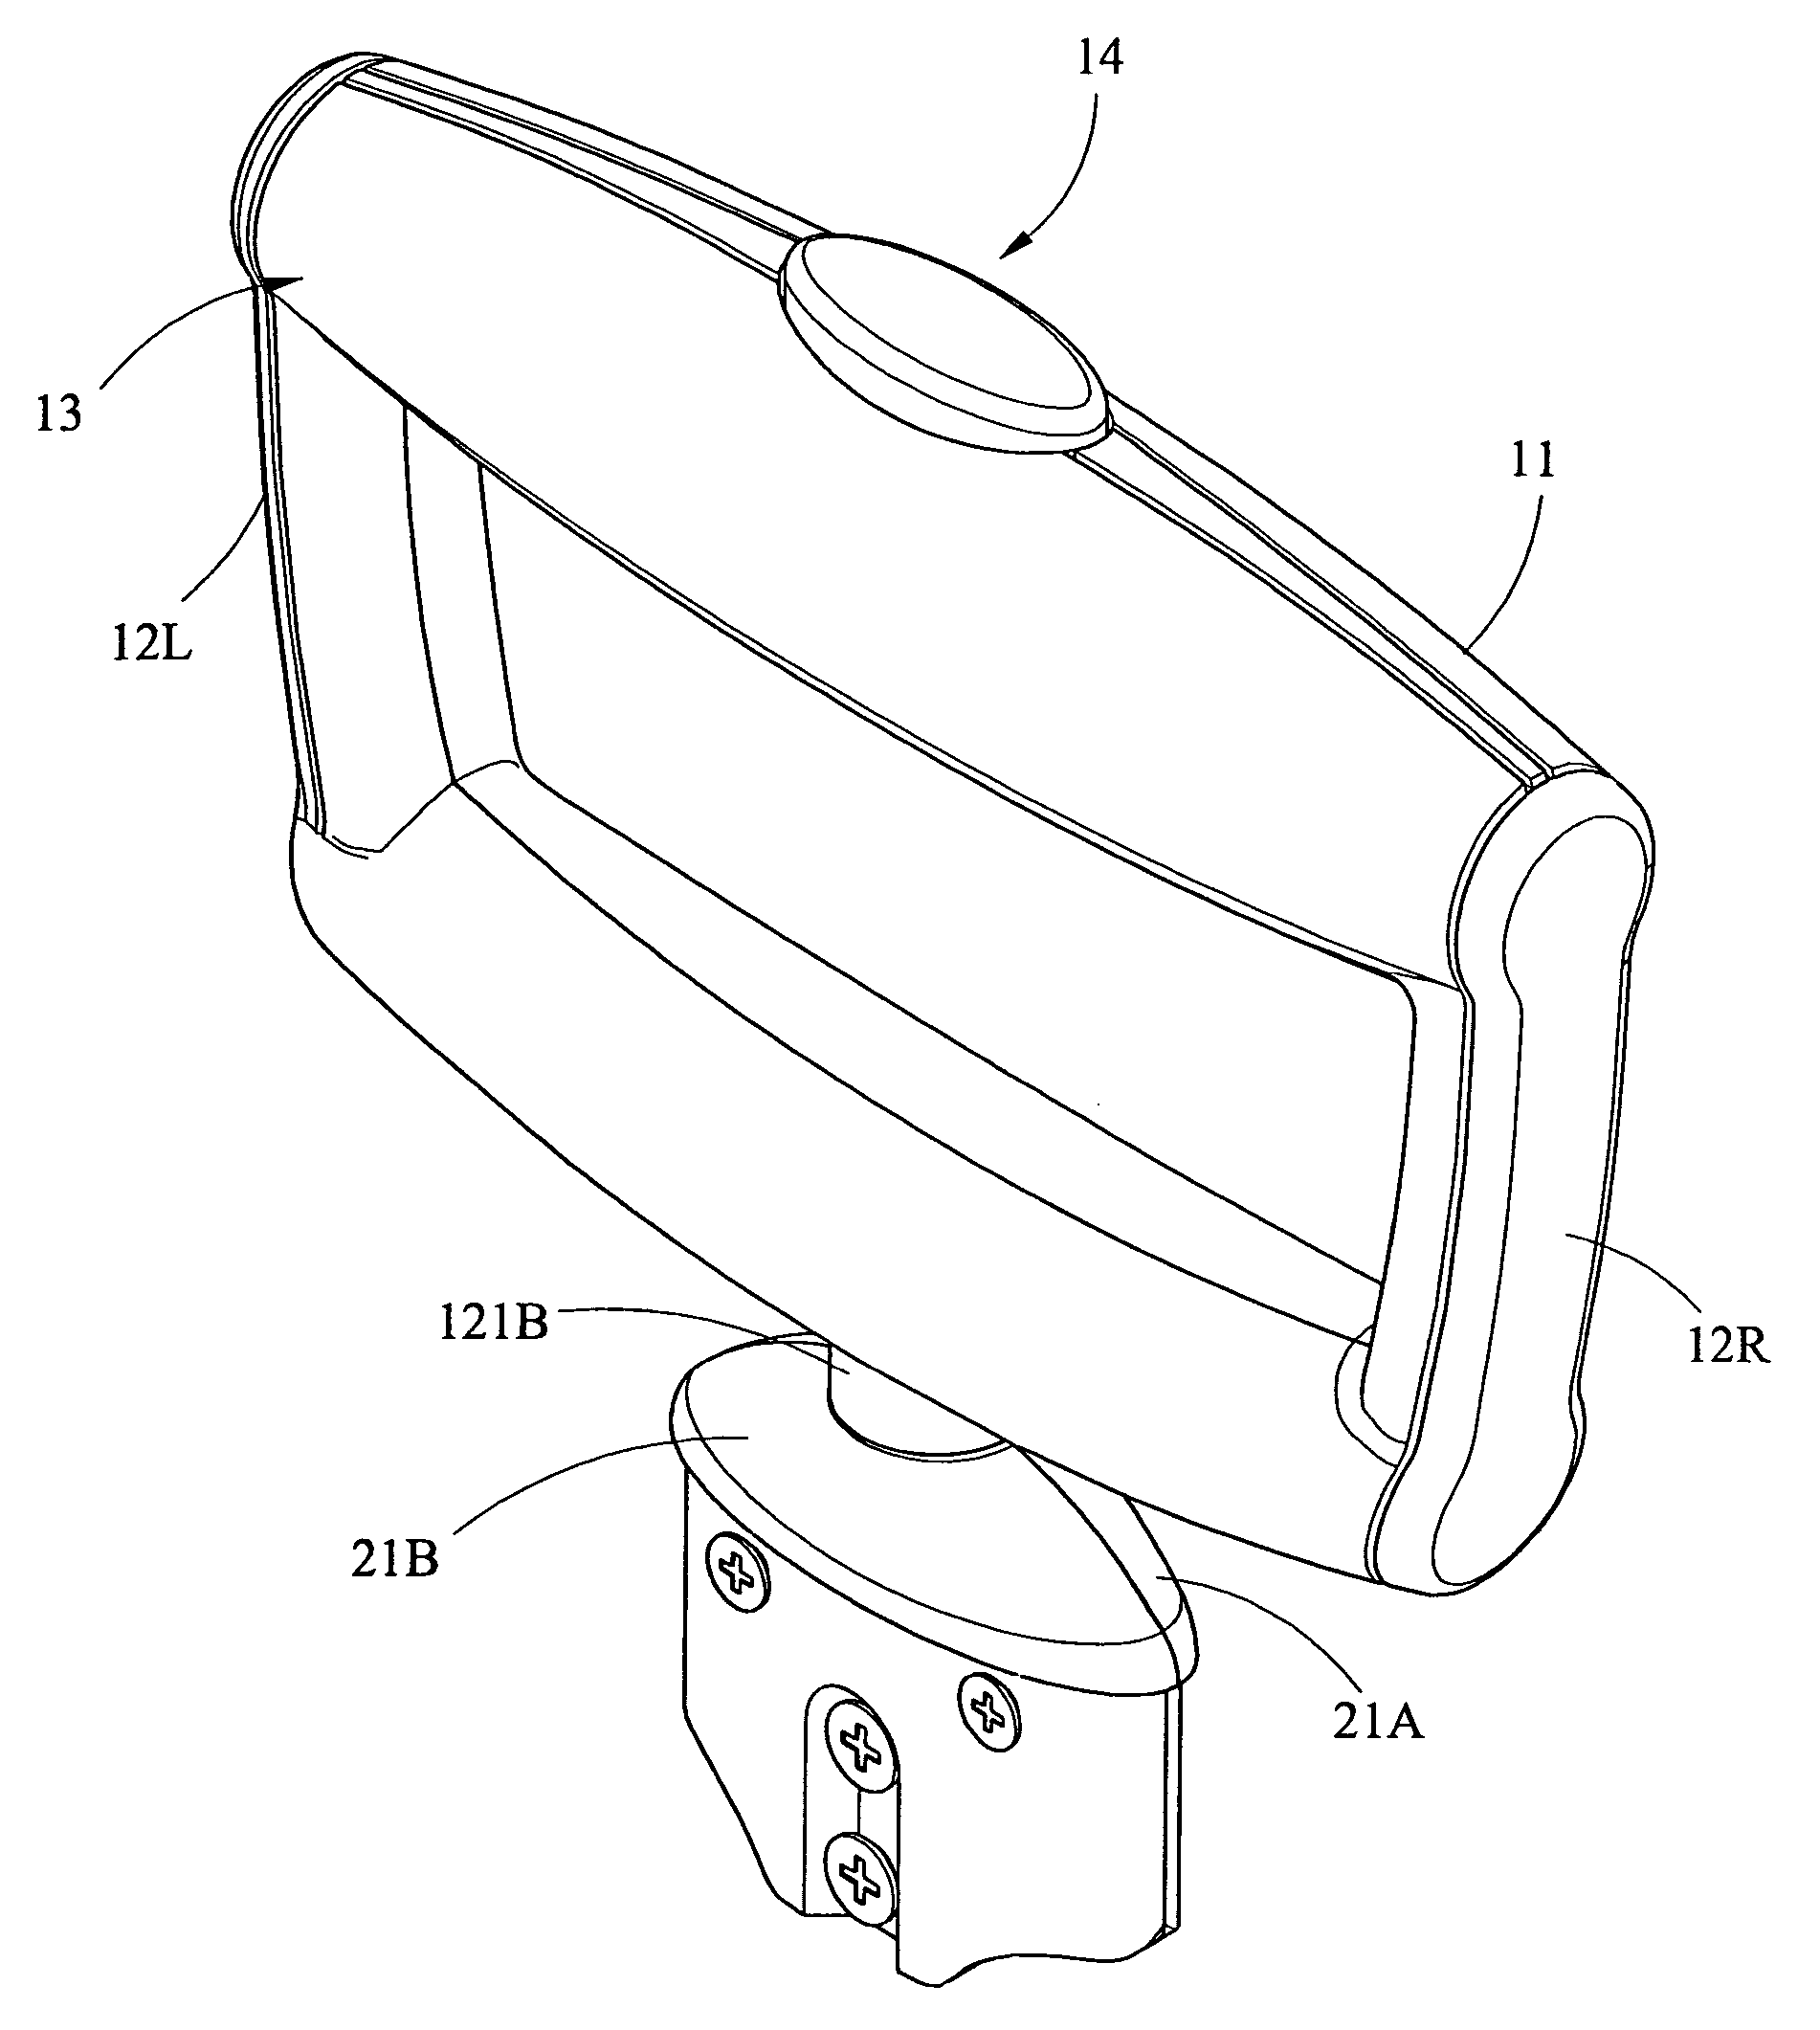 Retractable handle of wheeled luggage having one or two pulling rods